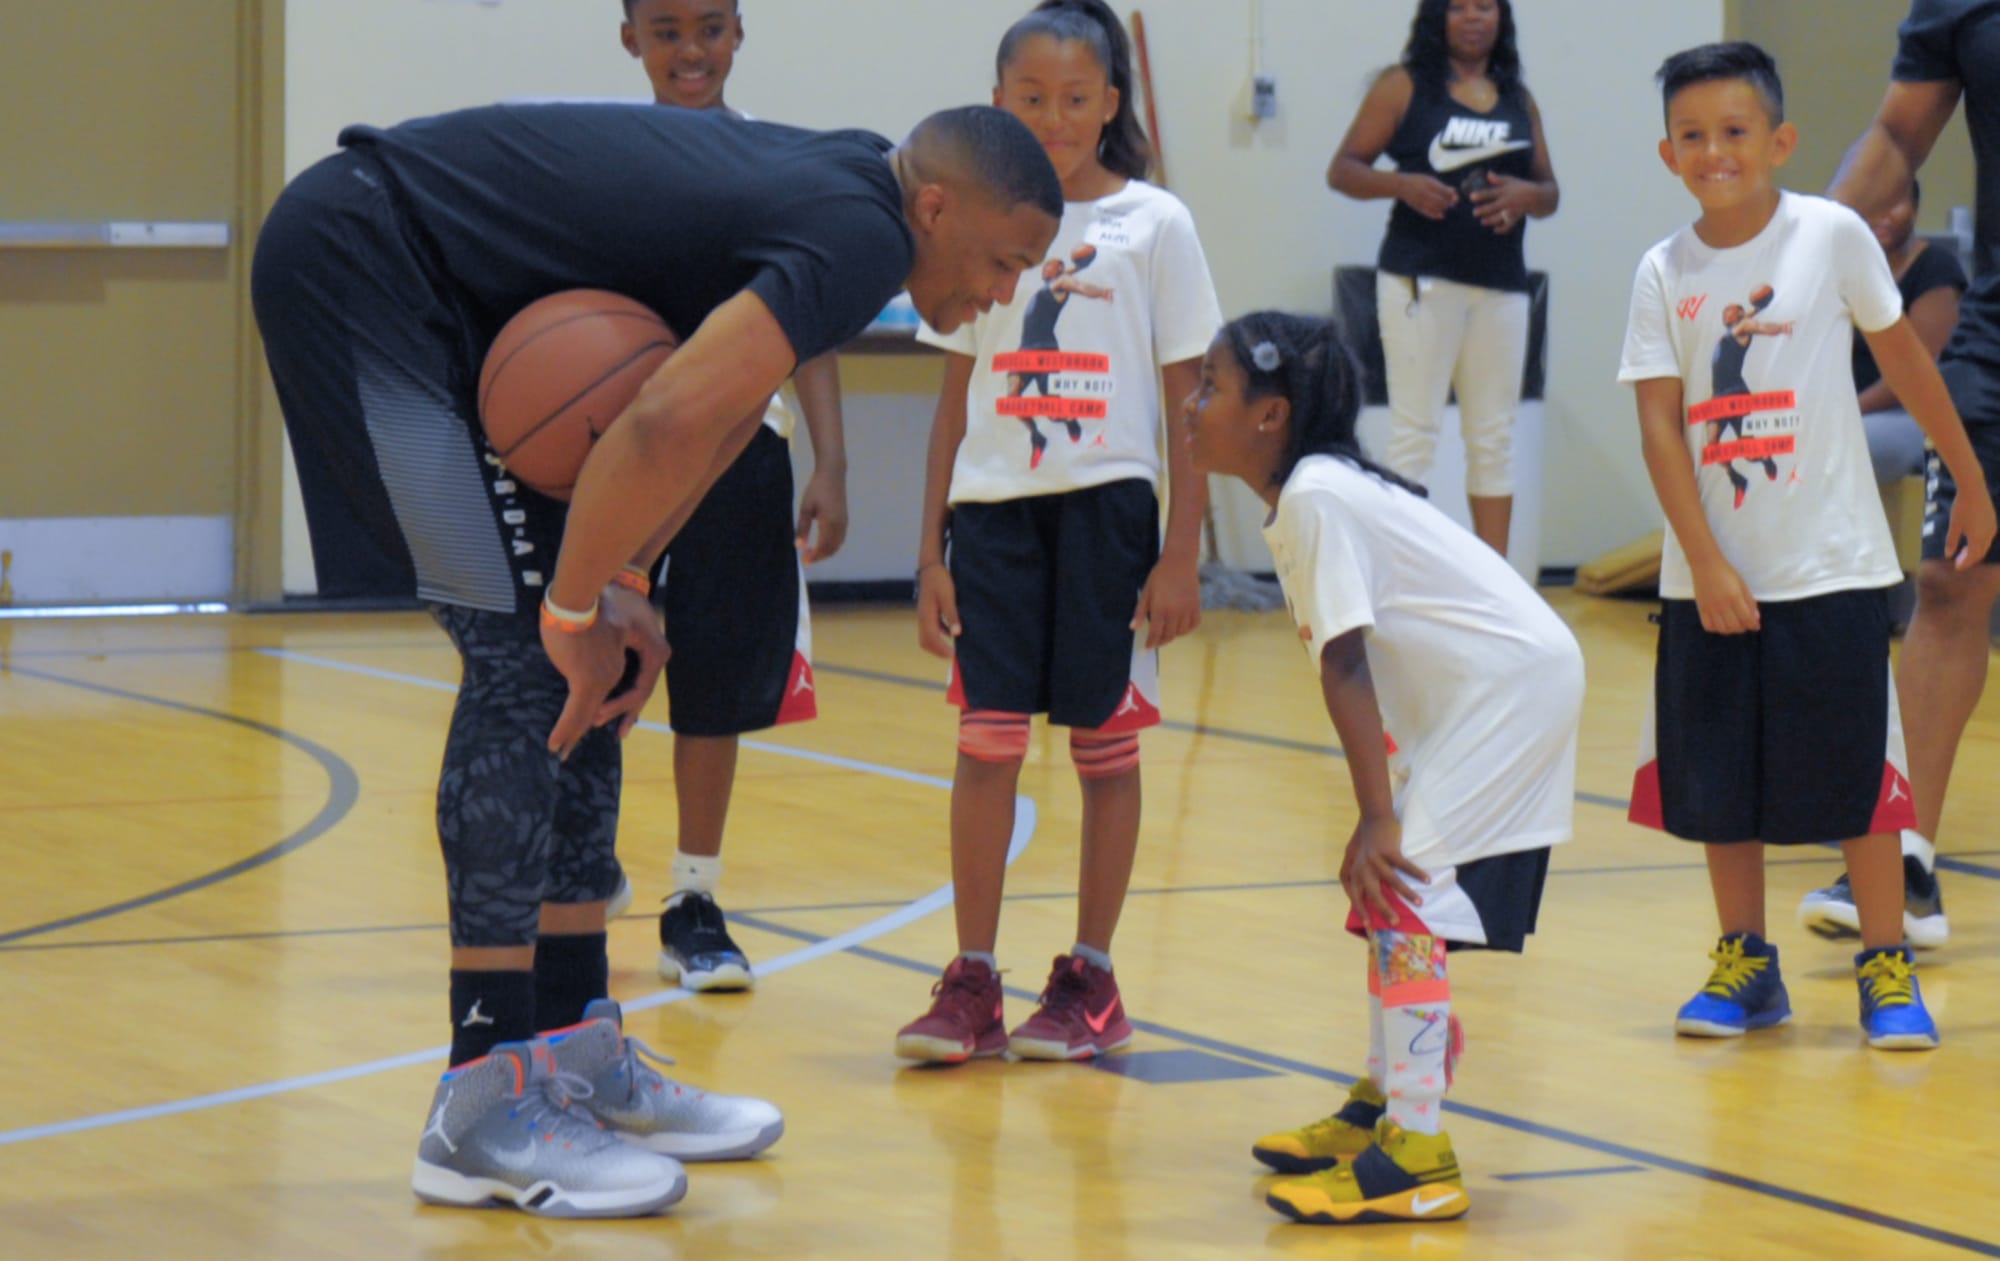 Satire lighed at opfinde Russell Westbrook creating memories at youth basketball camps